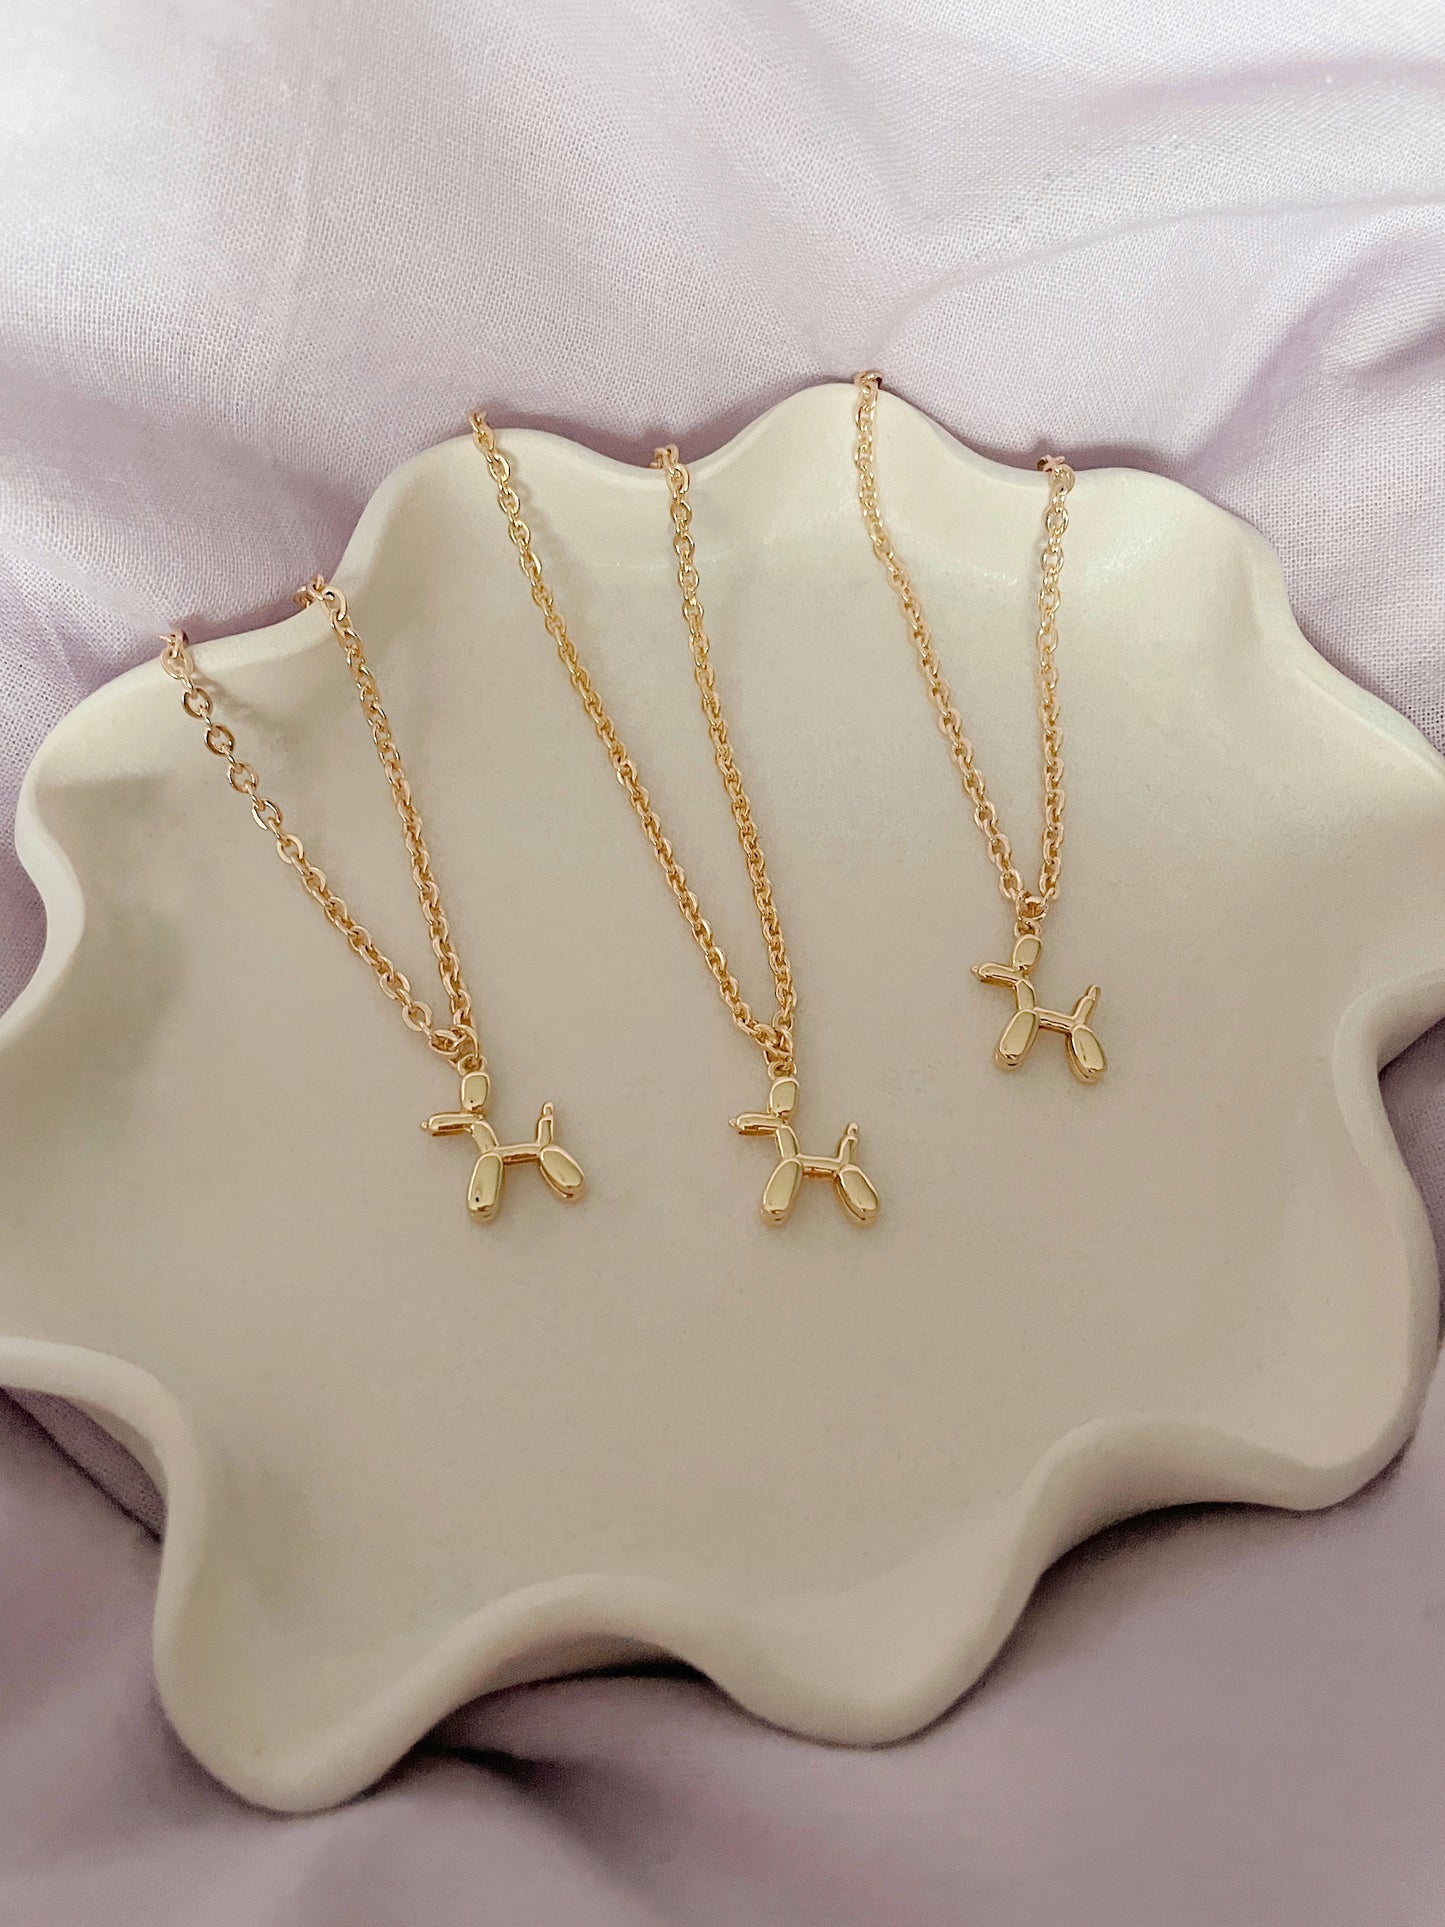 Poodle Necklace - 14k gold-plated necklace with balloon dog charm